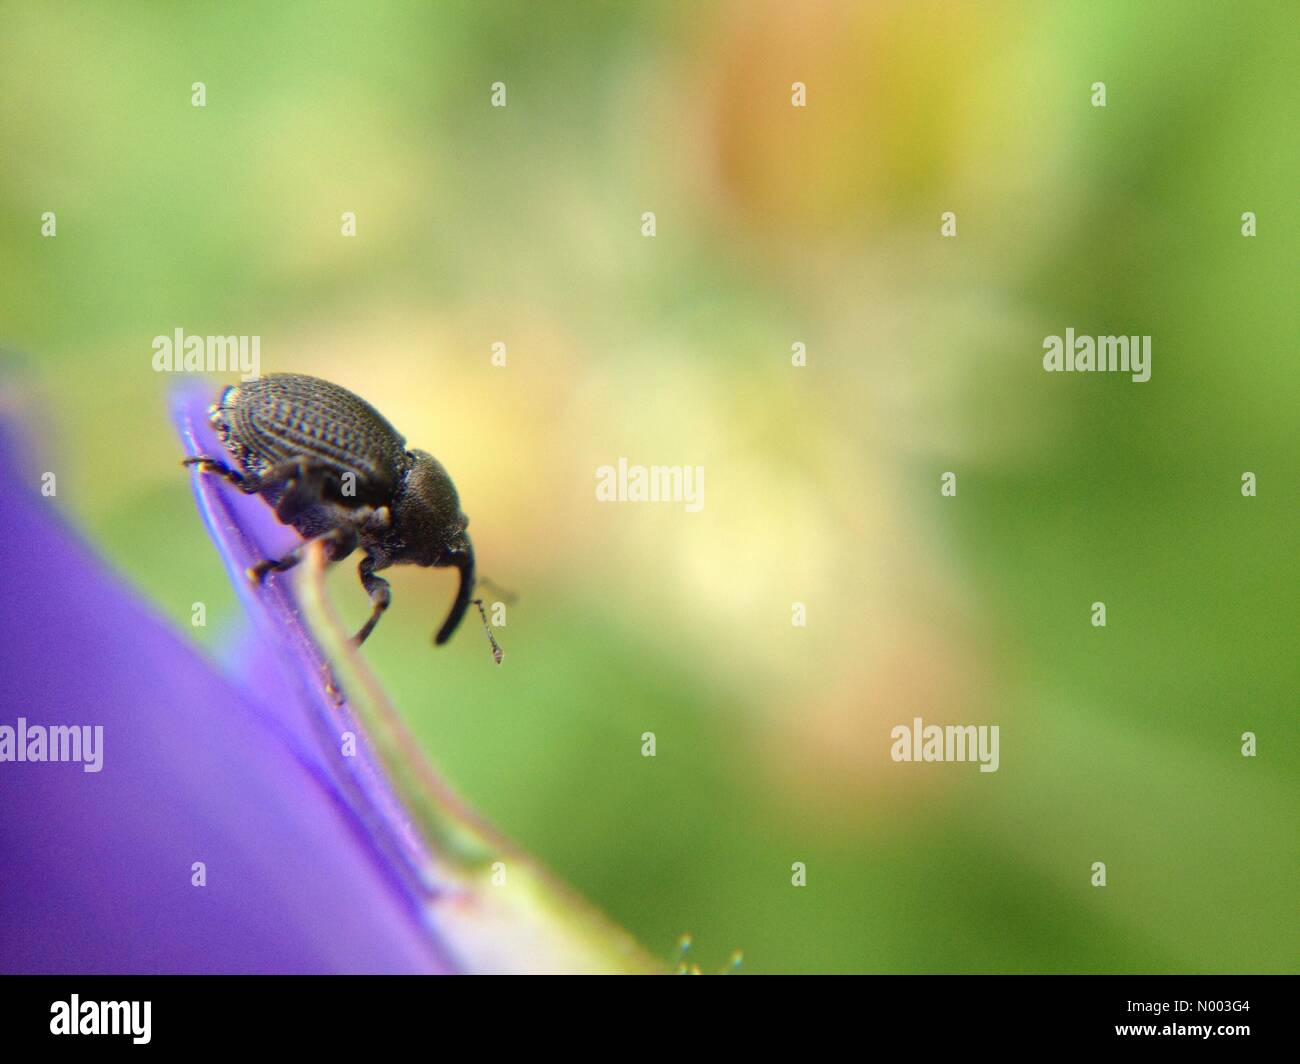 UK weather insects in West Yorkshire - as the warm weather continues the insects continue to enjoy the sun. This beetle was pollinating a hardy geranium. Taken on the 2nd July 2015 in West Yorkshire. Stock Photo